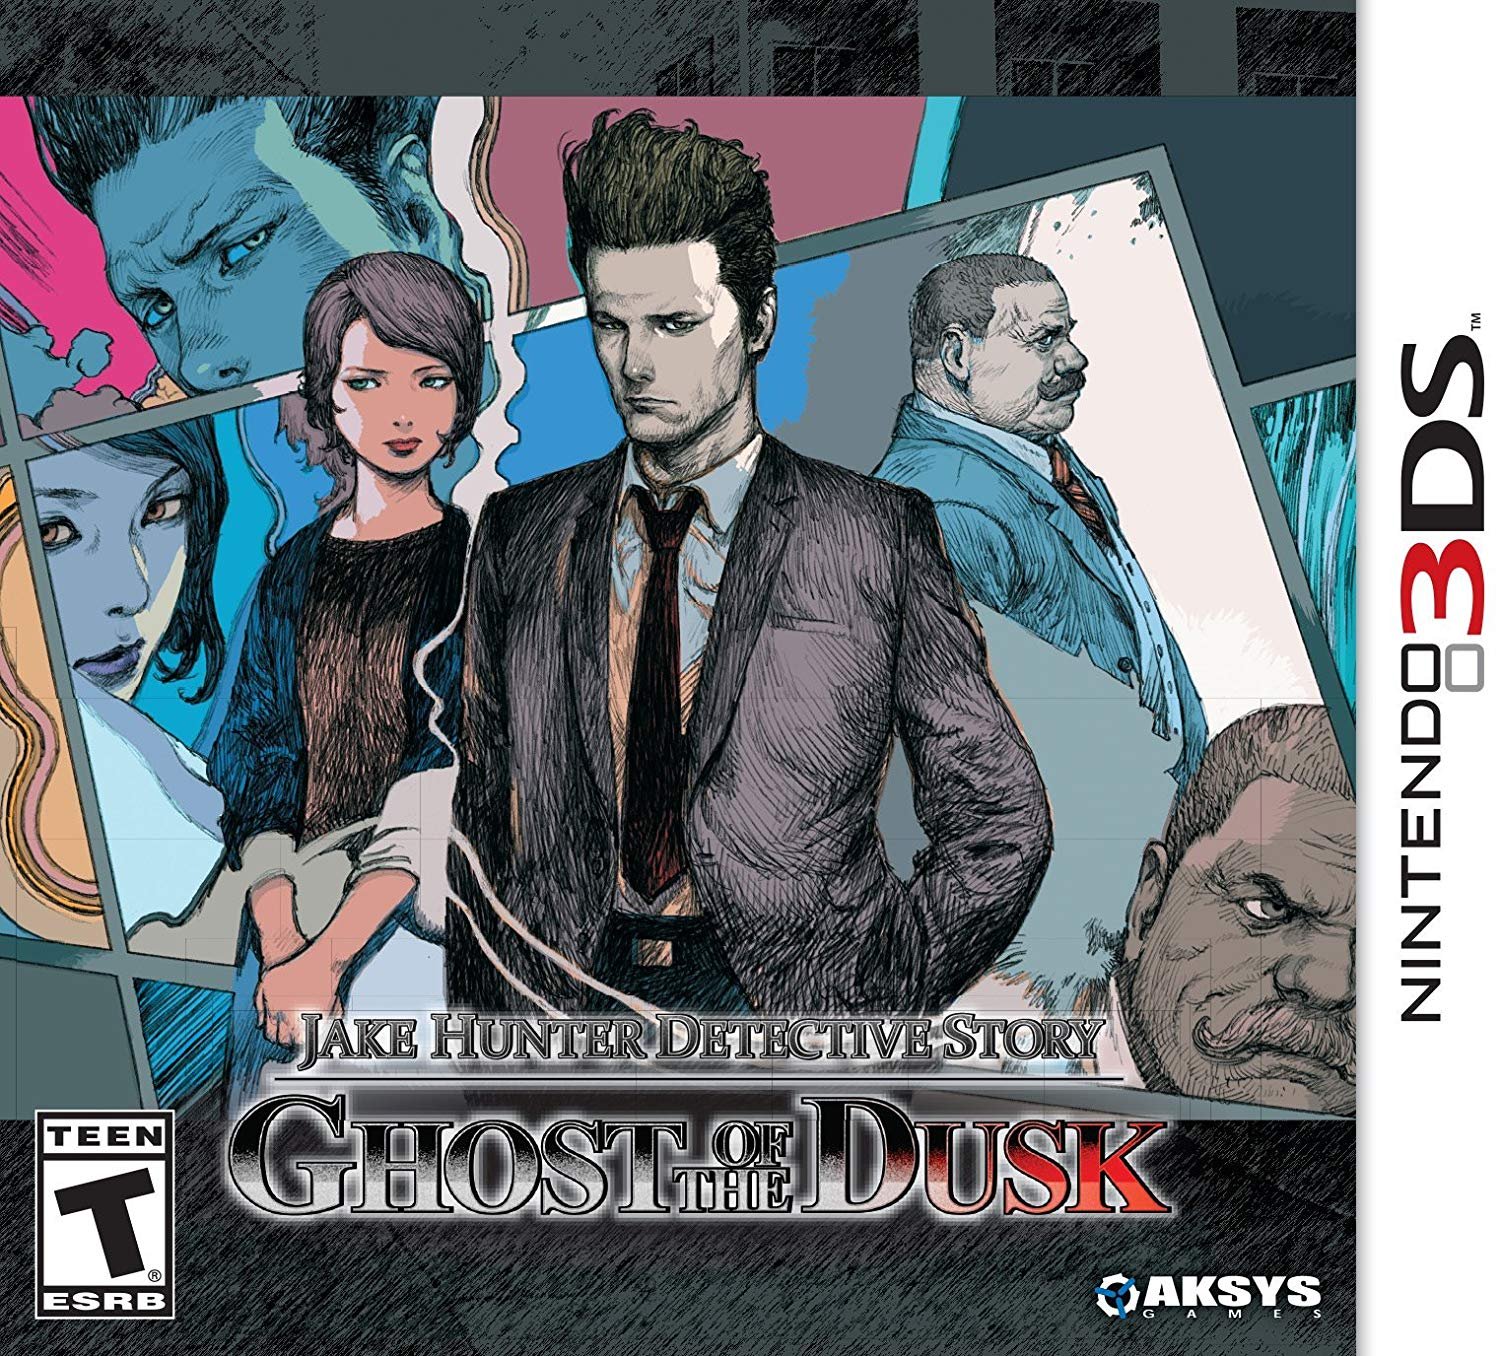 Image of Jake Hunter Detective Story: Ghost of The Dusk